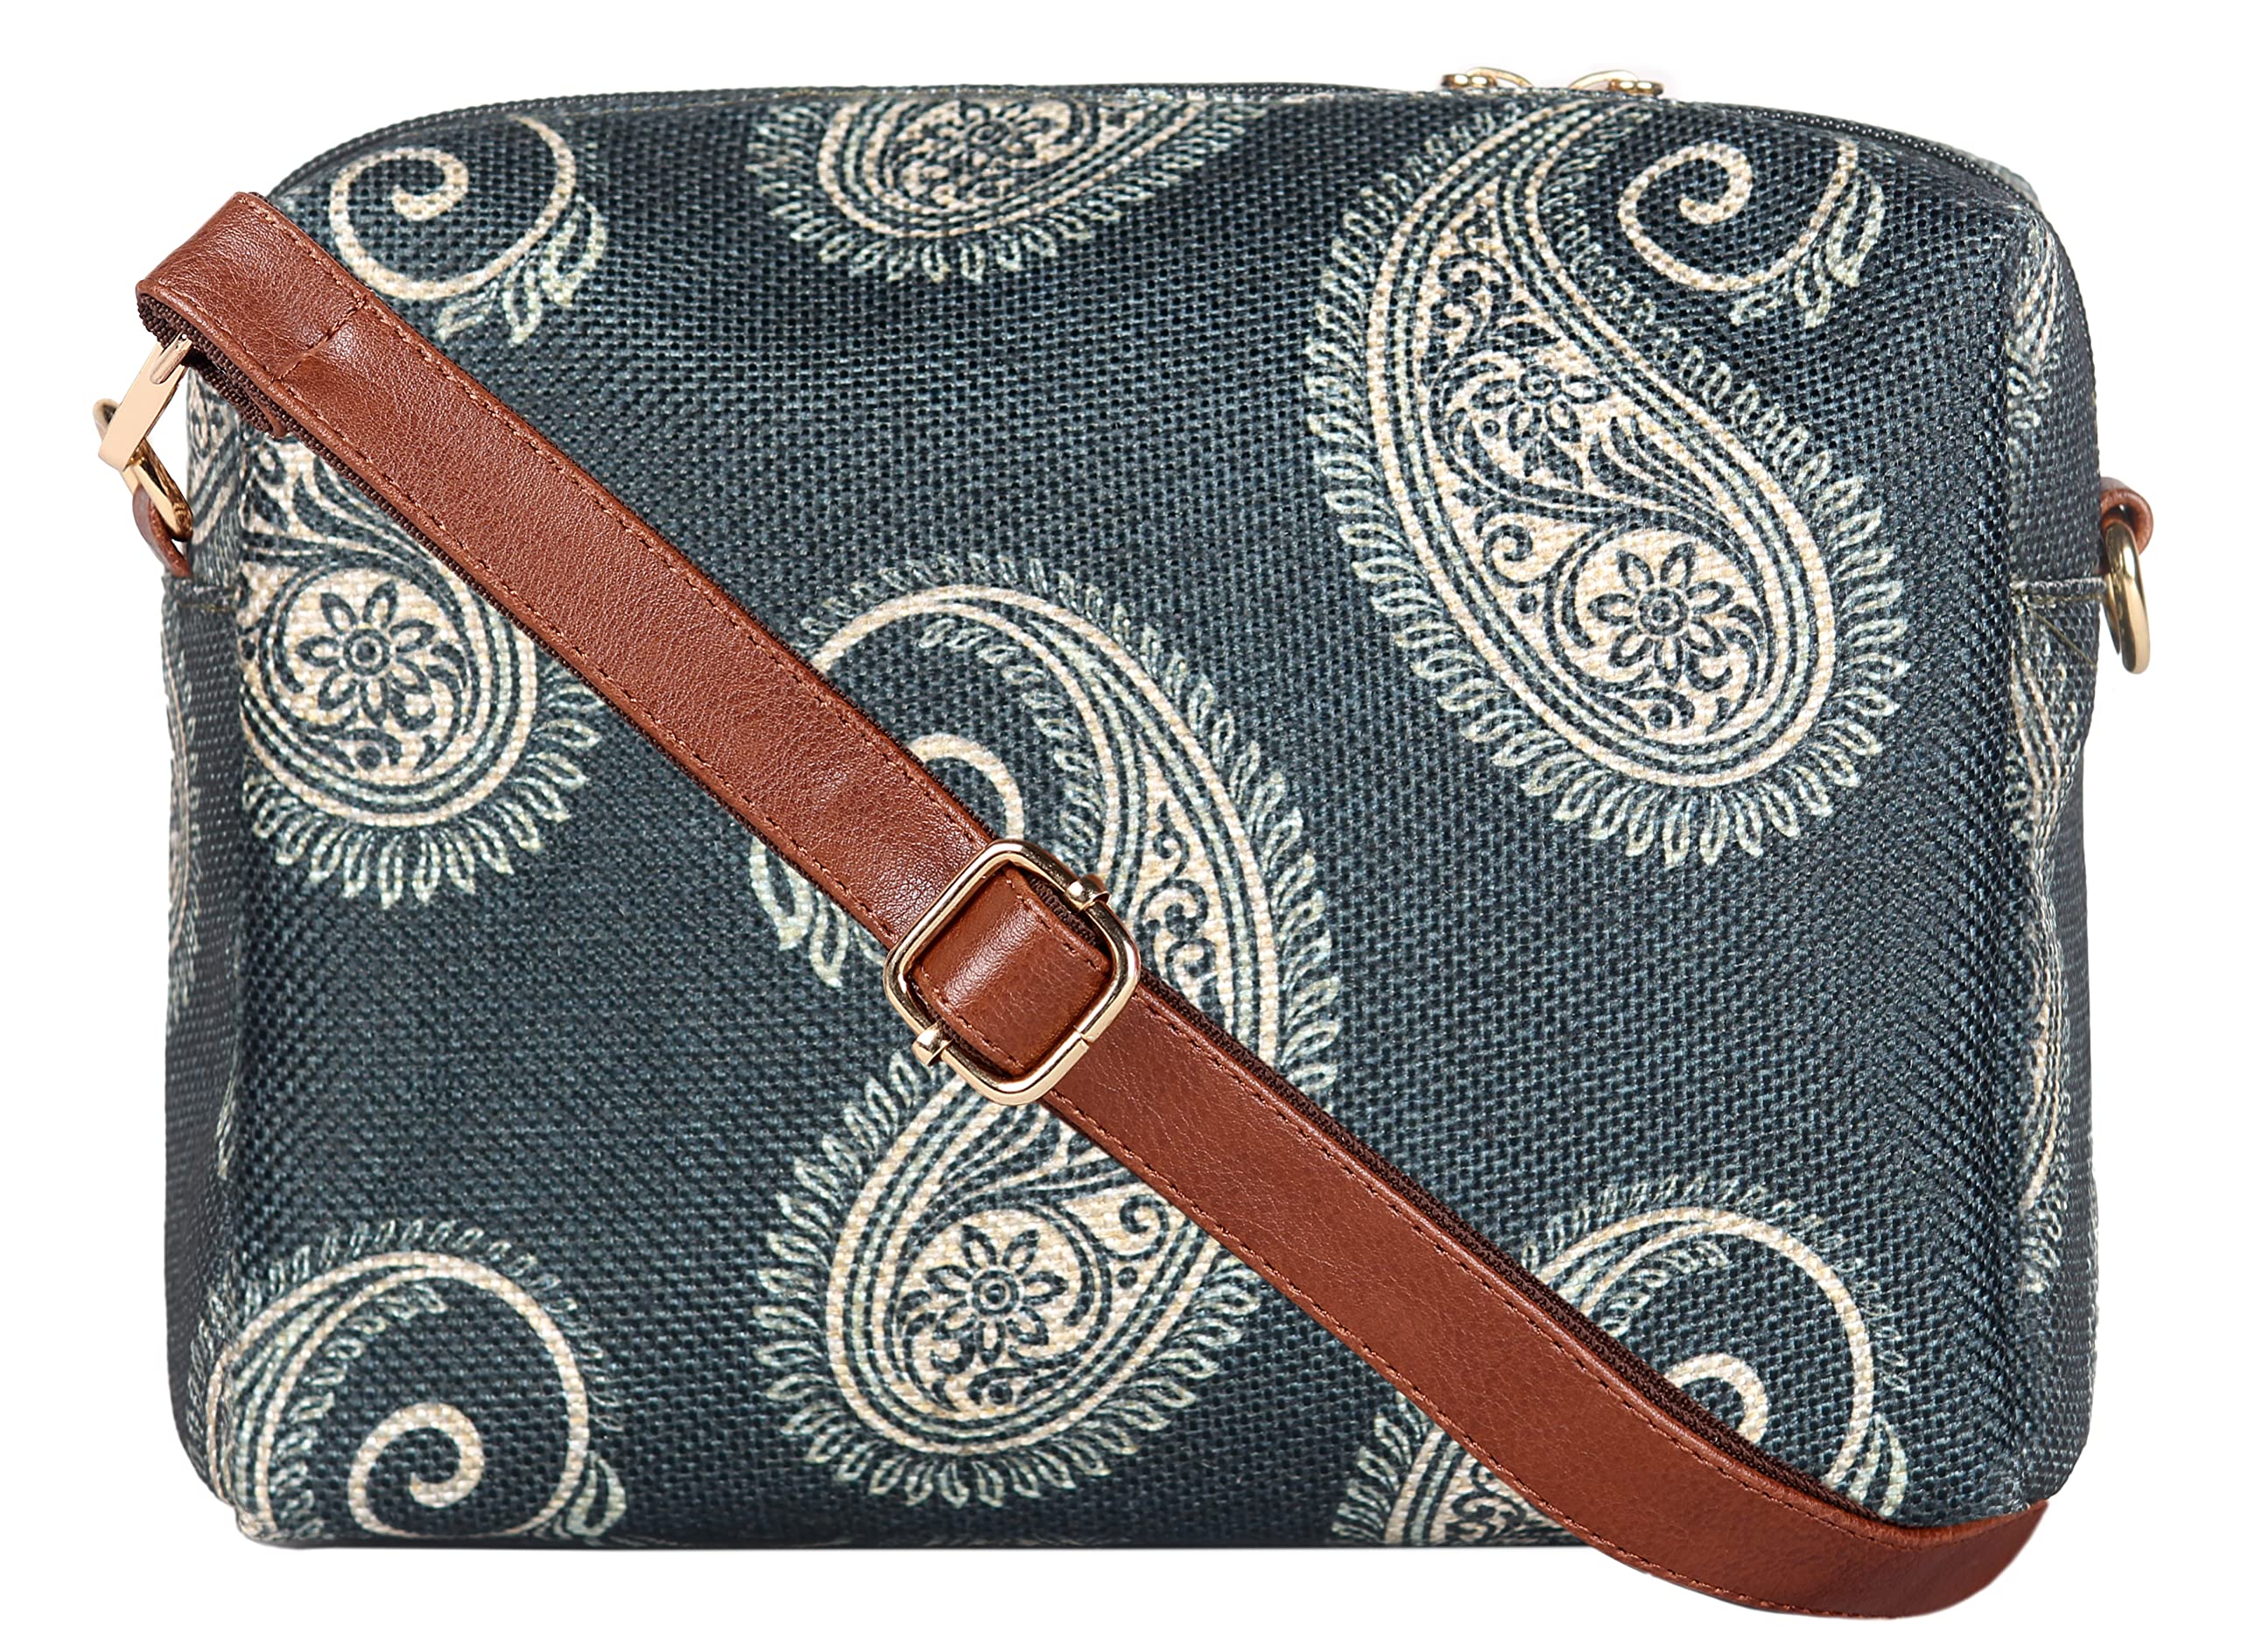 Sling Bag with Printed Strap